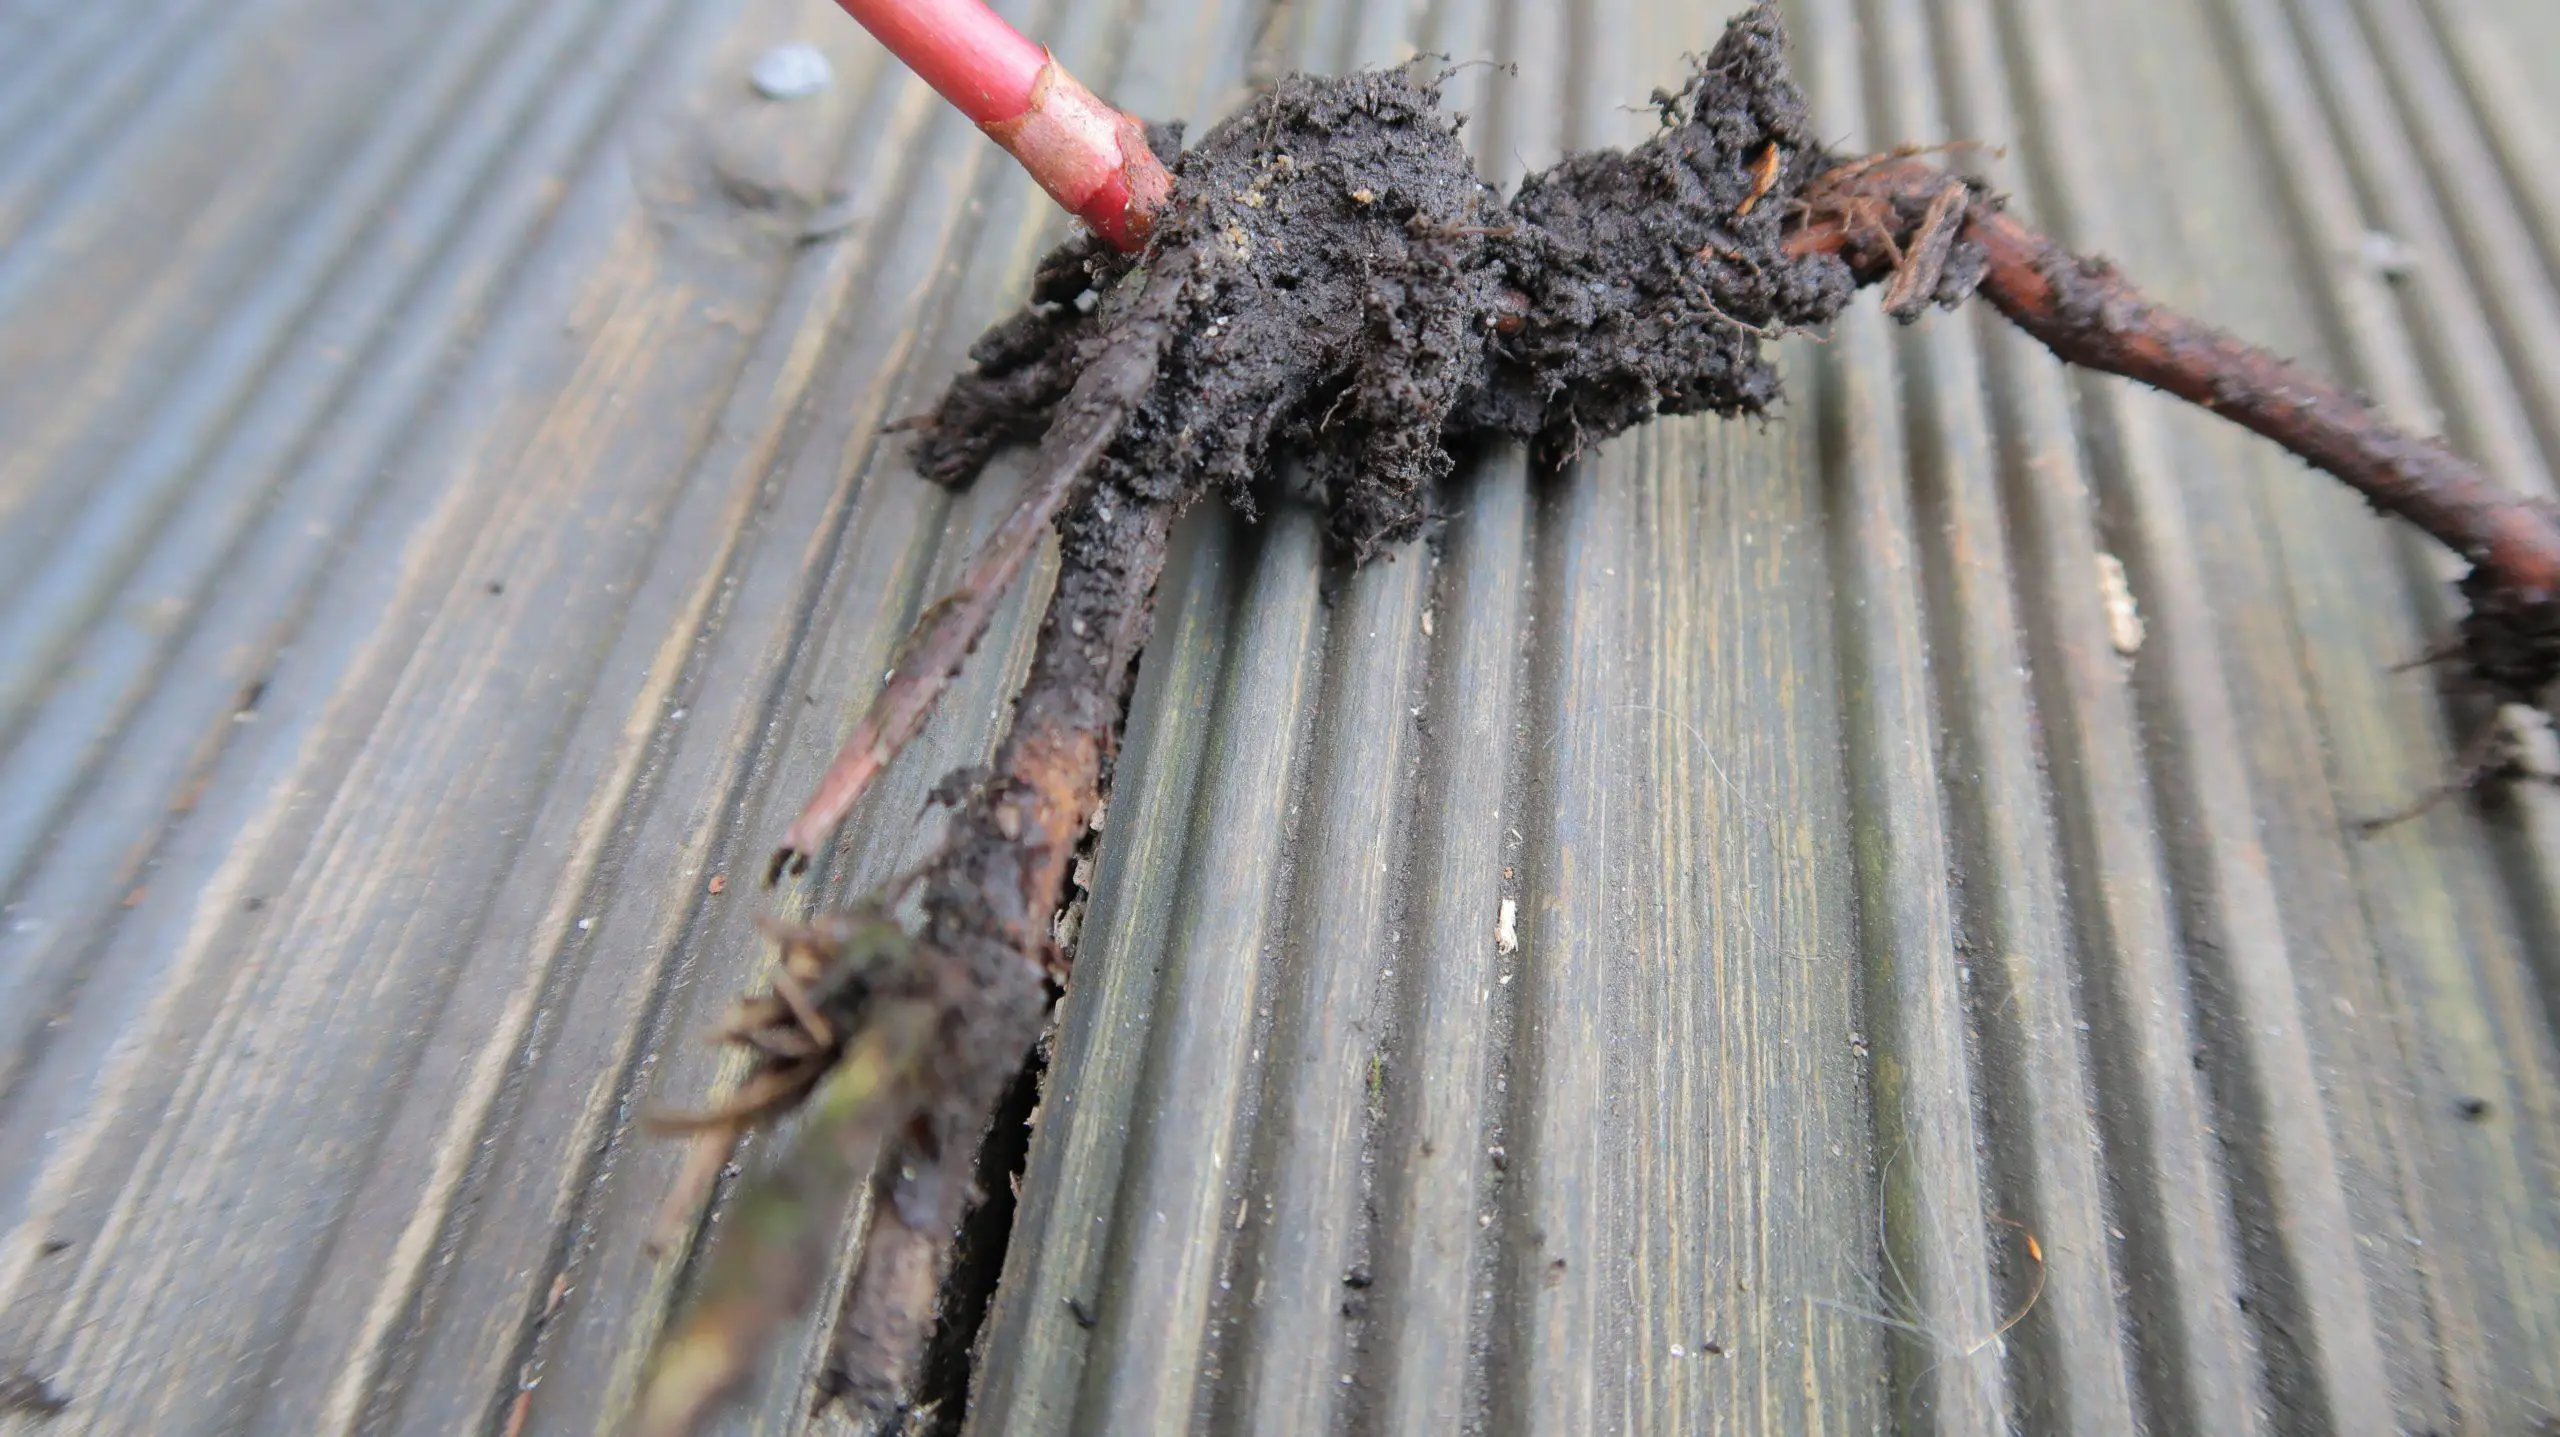 Japanese knotweed roots spread far and wide which makes them difficult to remove